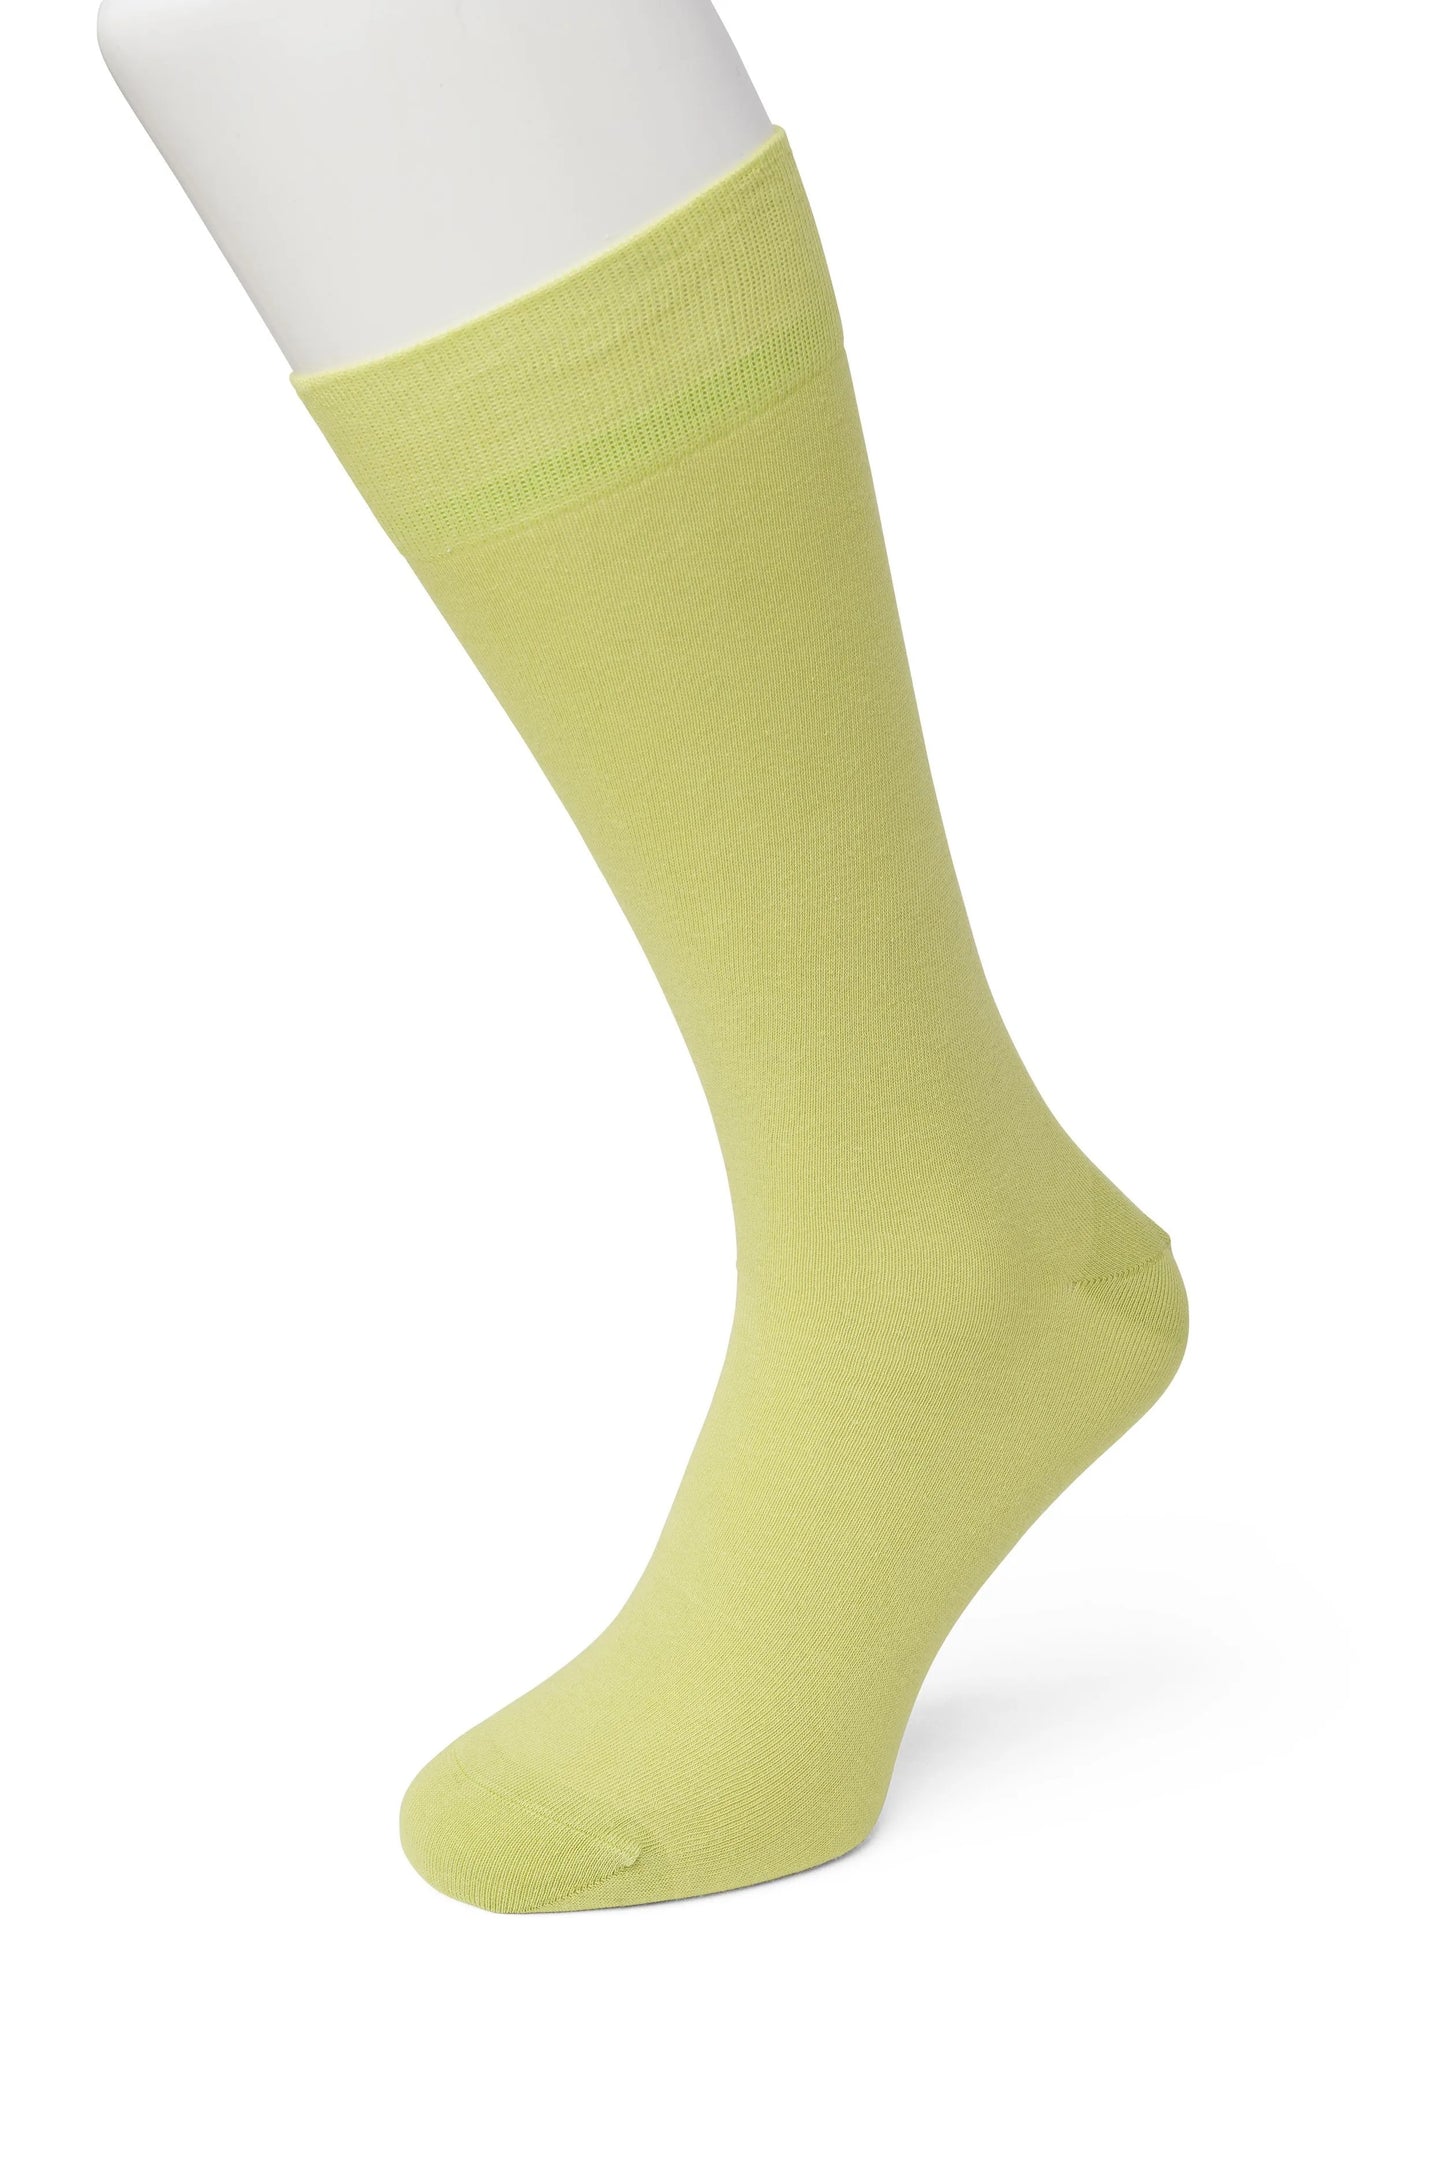 Bonnie Doon 83422 Cotton Sock - light lime green (lime) ankle socks available in women sizes